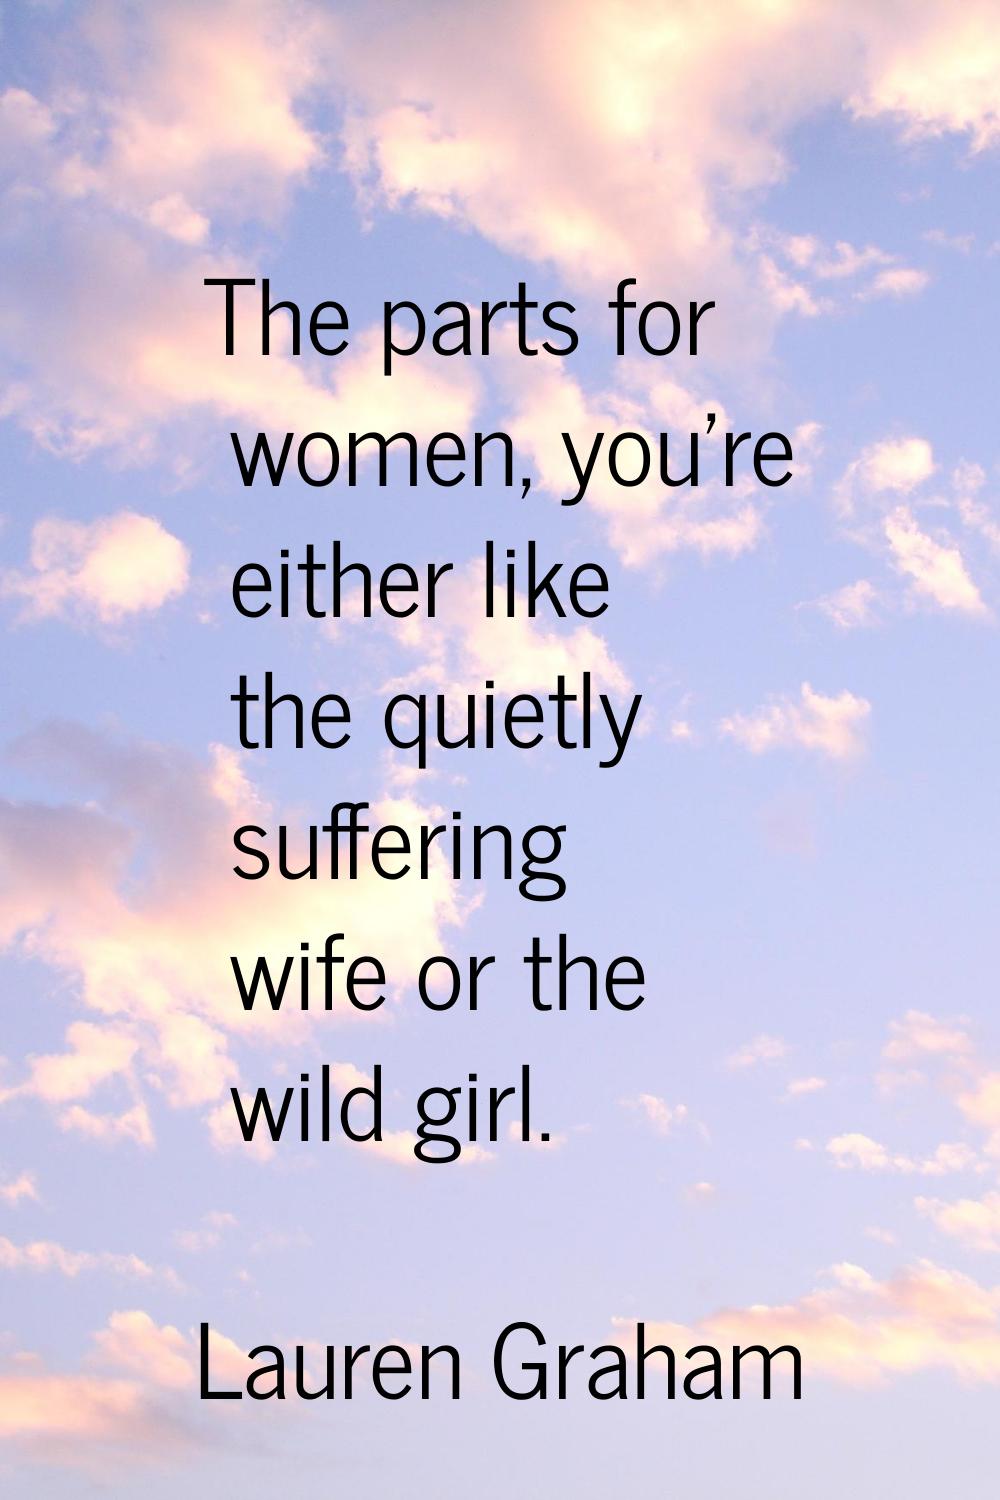 The parts for women, you're either like the quietly suffering wife or the wild girl.